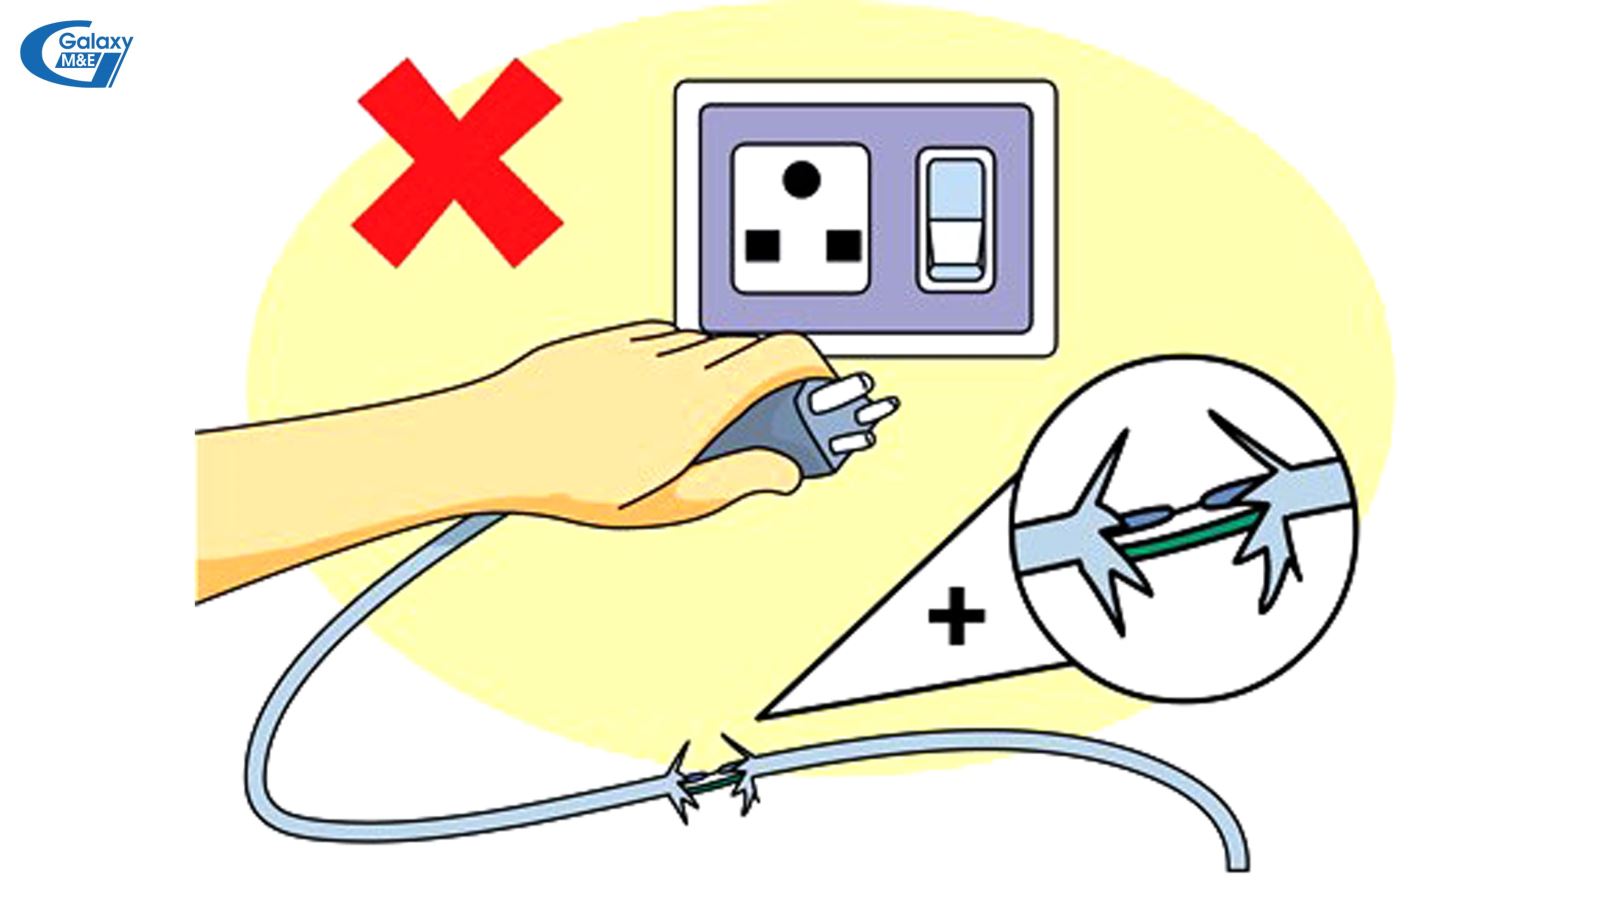 Eliminate the peeling of the power cord from household appliances | Galaxy M&E